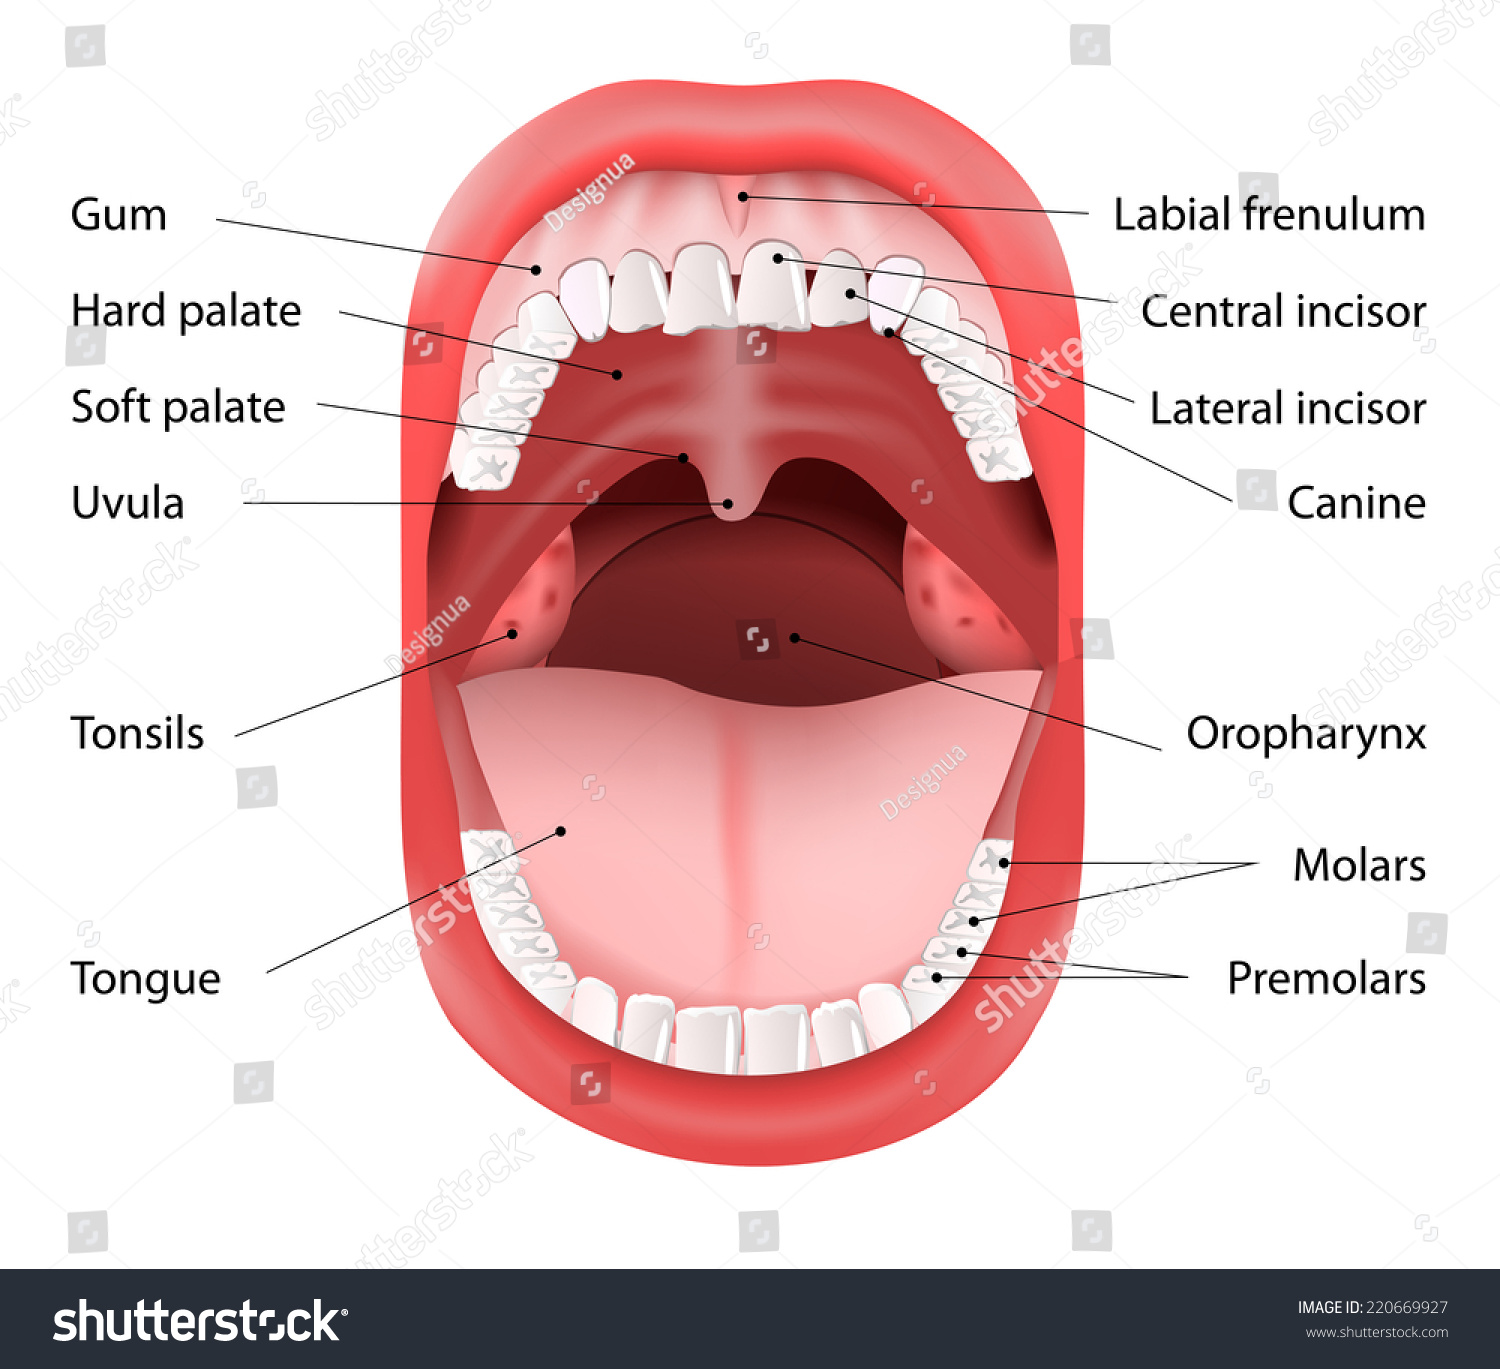 Parts Of The Mouth Diagram 22